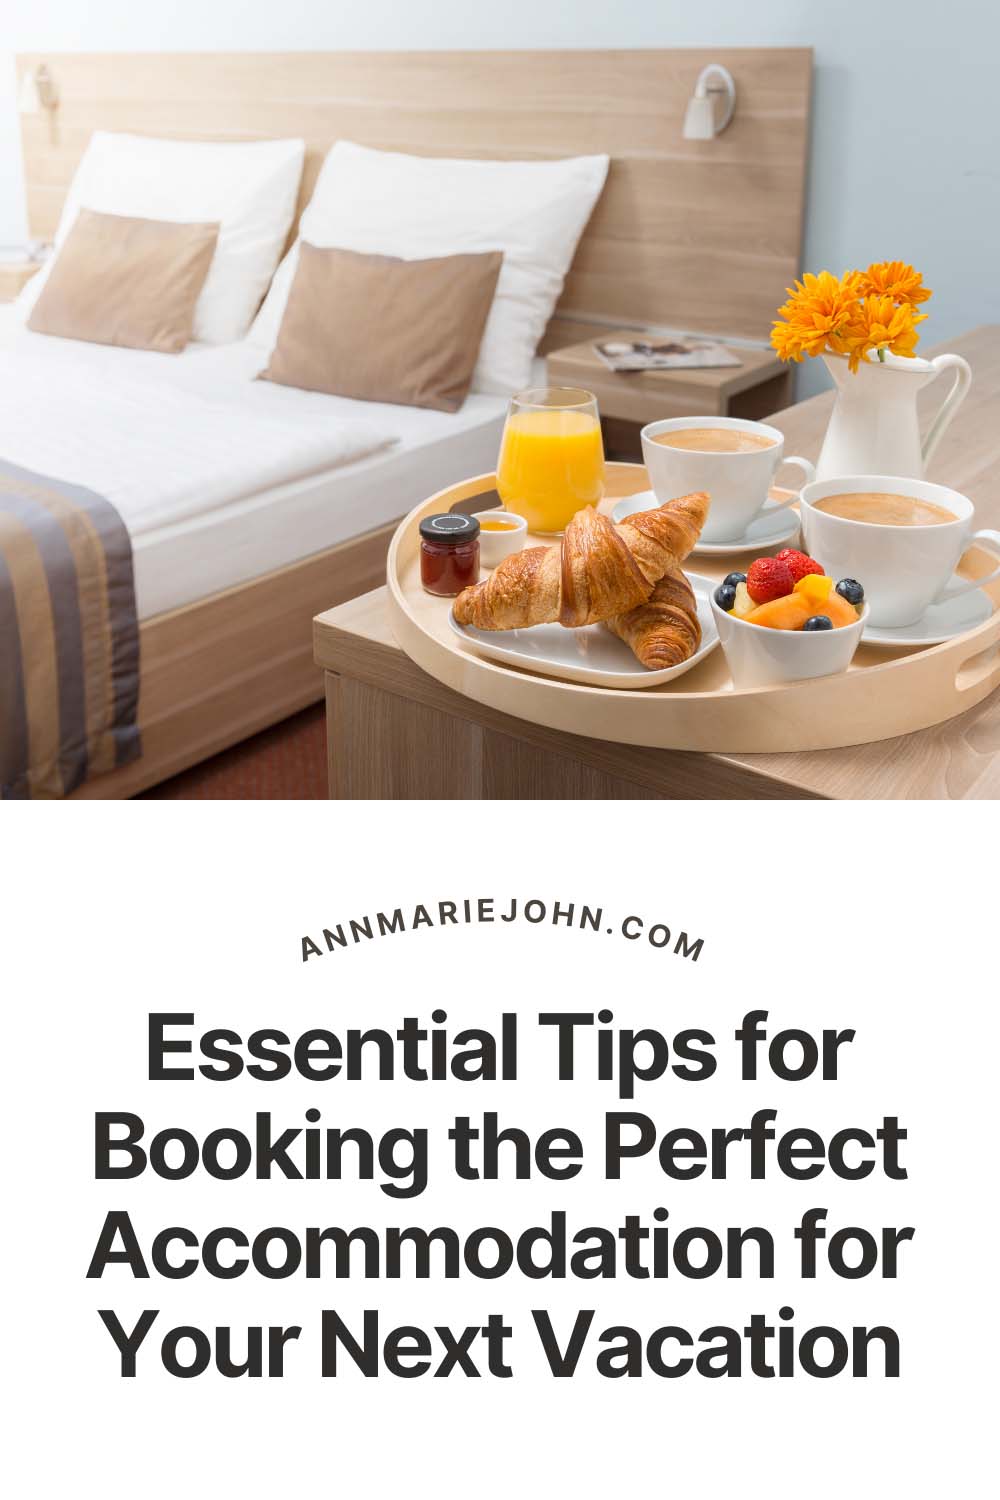 Essential Tips for Booking the Perfect Accommodation for Your Next Vacation